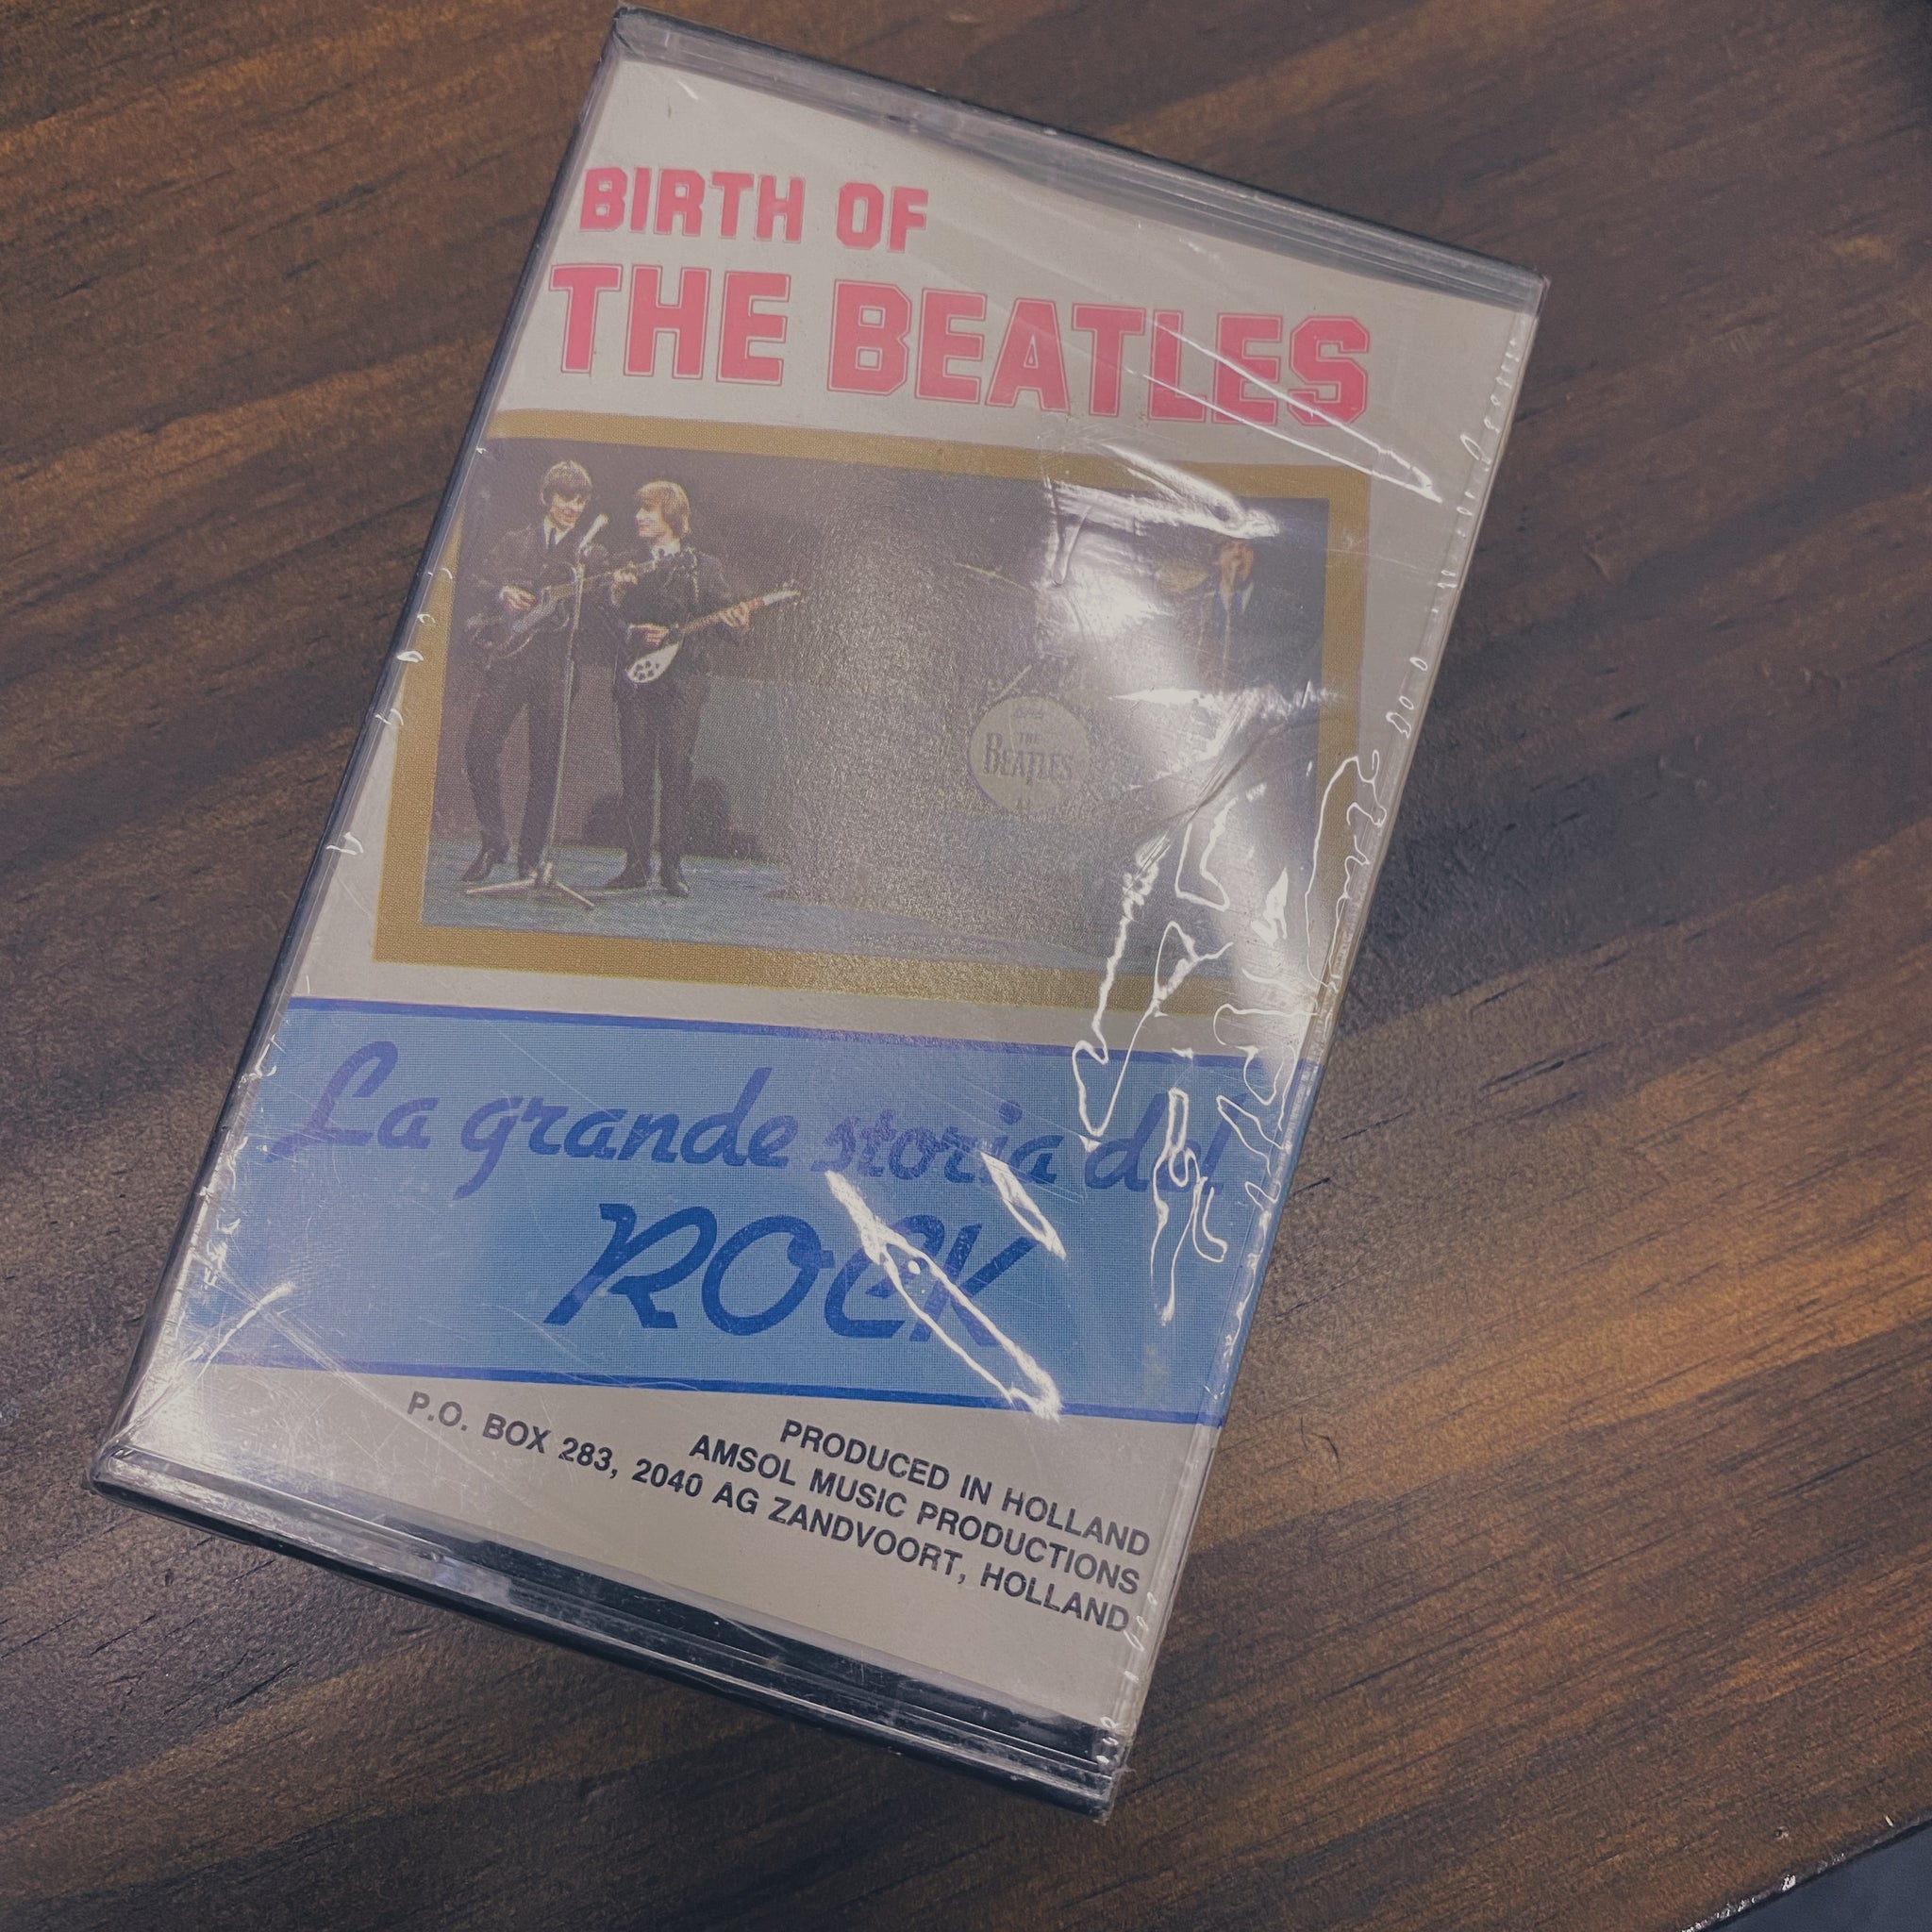 The Beatles - Birth Of The Beatles